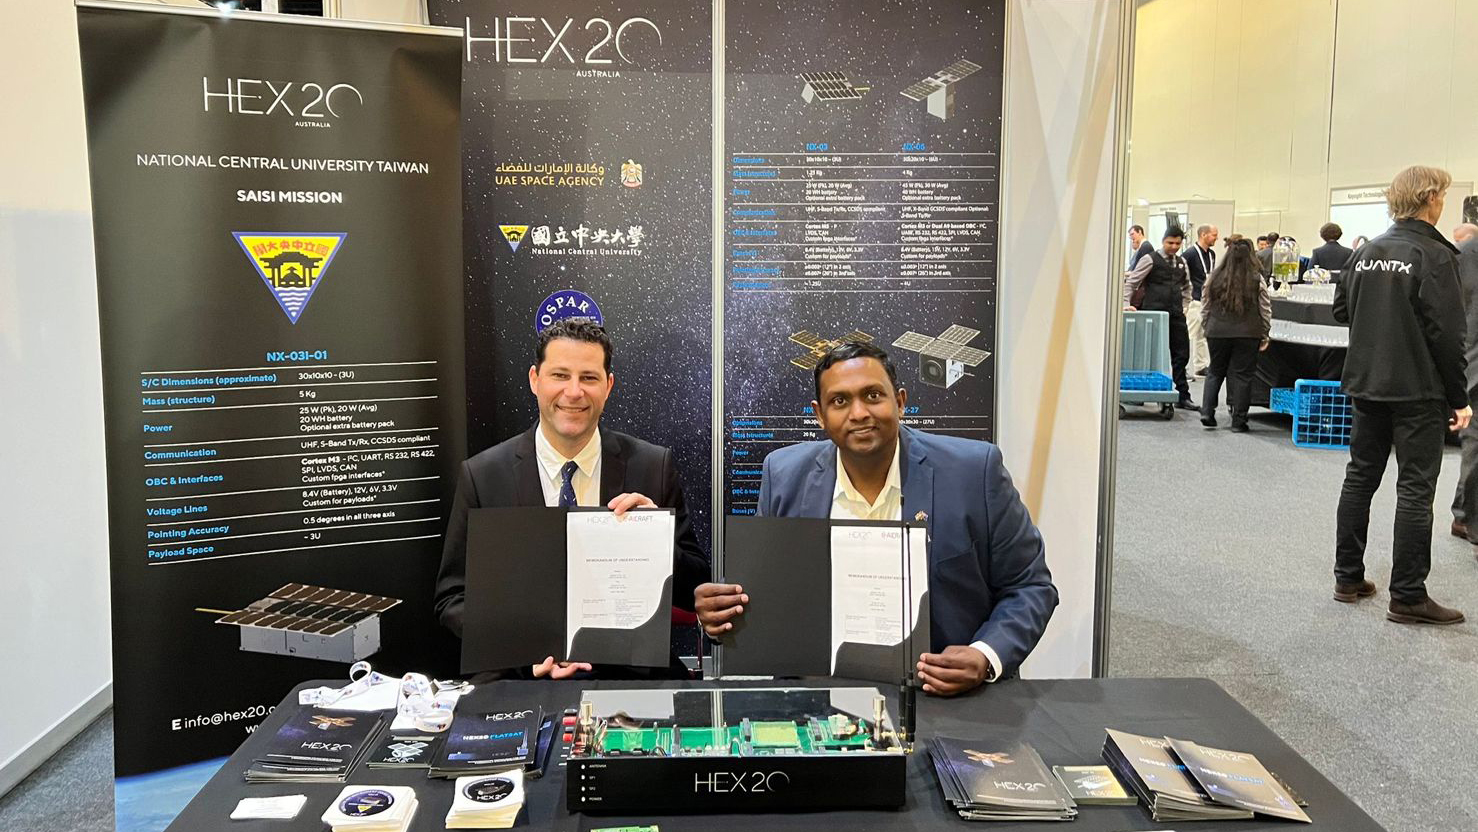 Dr Tony Scoleri of AICRAFT and Lloyd Jacob Lopez of HEX20 signing a memorandum of understanding at the 15th Australian Space Forum